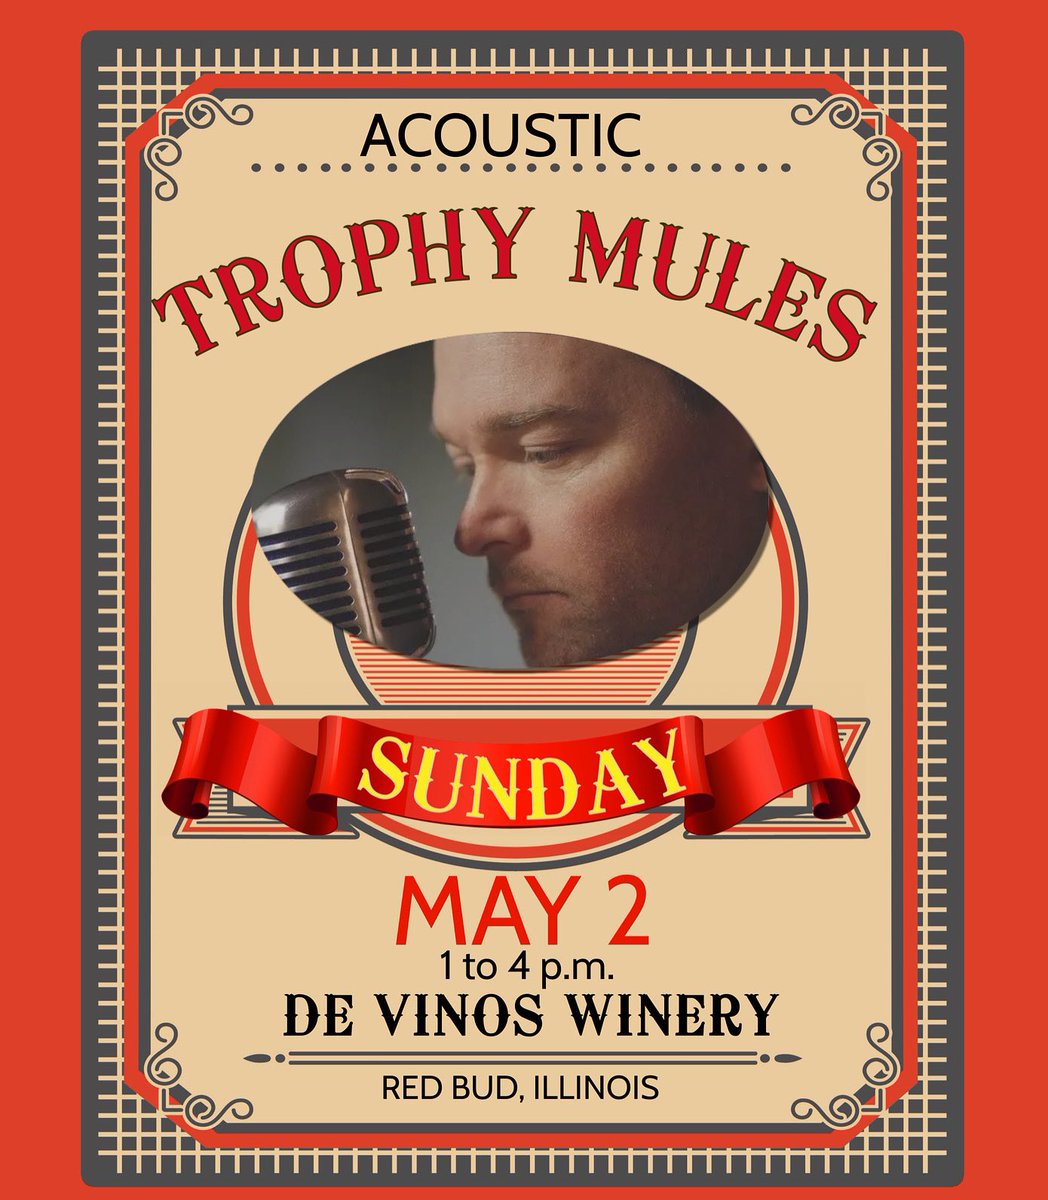 Sunday Funday in Red Bud, Illinois on May 2... #livemusic #goseeashow #songwriting